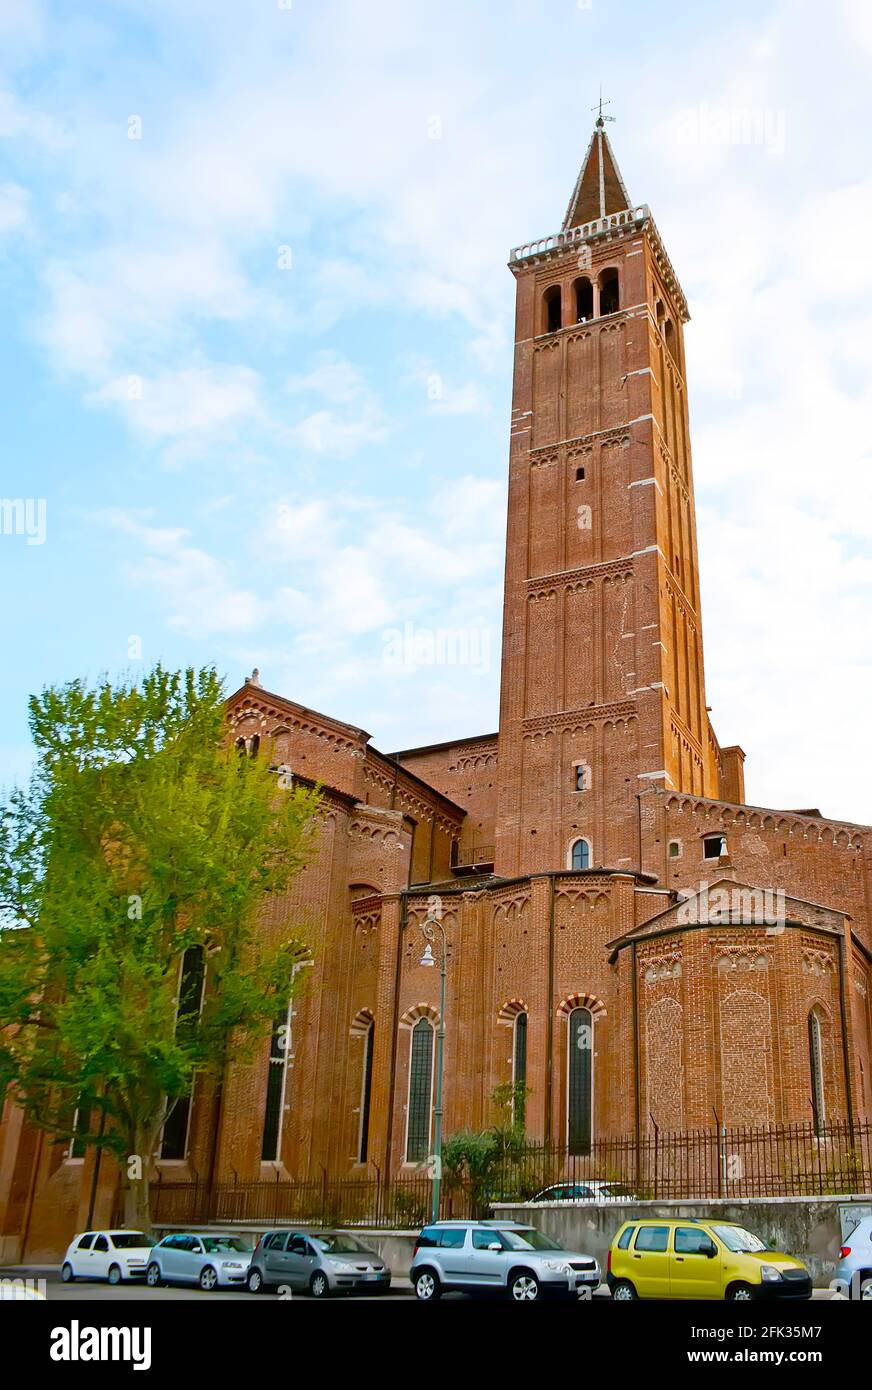 The brick building of the medieval Gothic Santa Anastasia Basilica with  tall bell tower, view from the Piazza Bra Molinari square, Verona, Italy  Stock Photo - Alamy